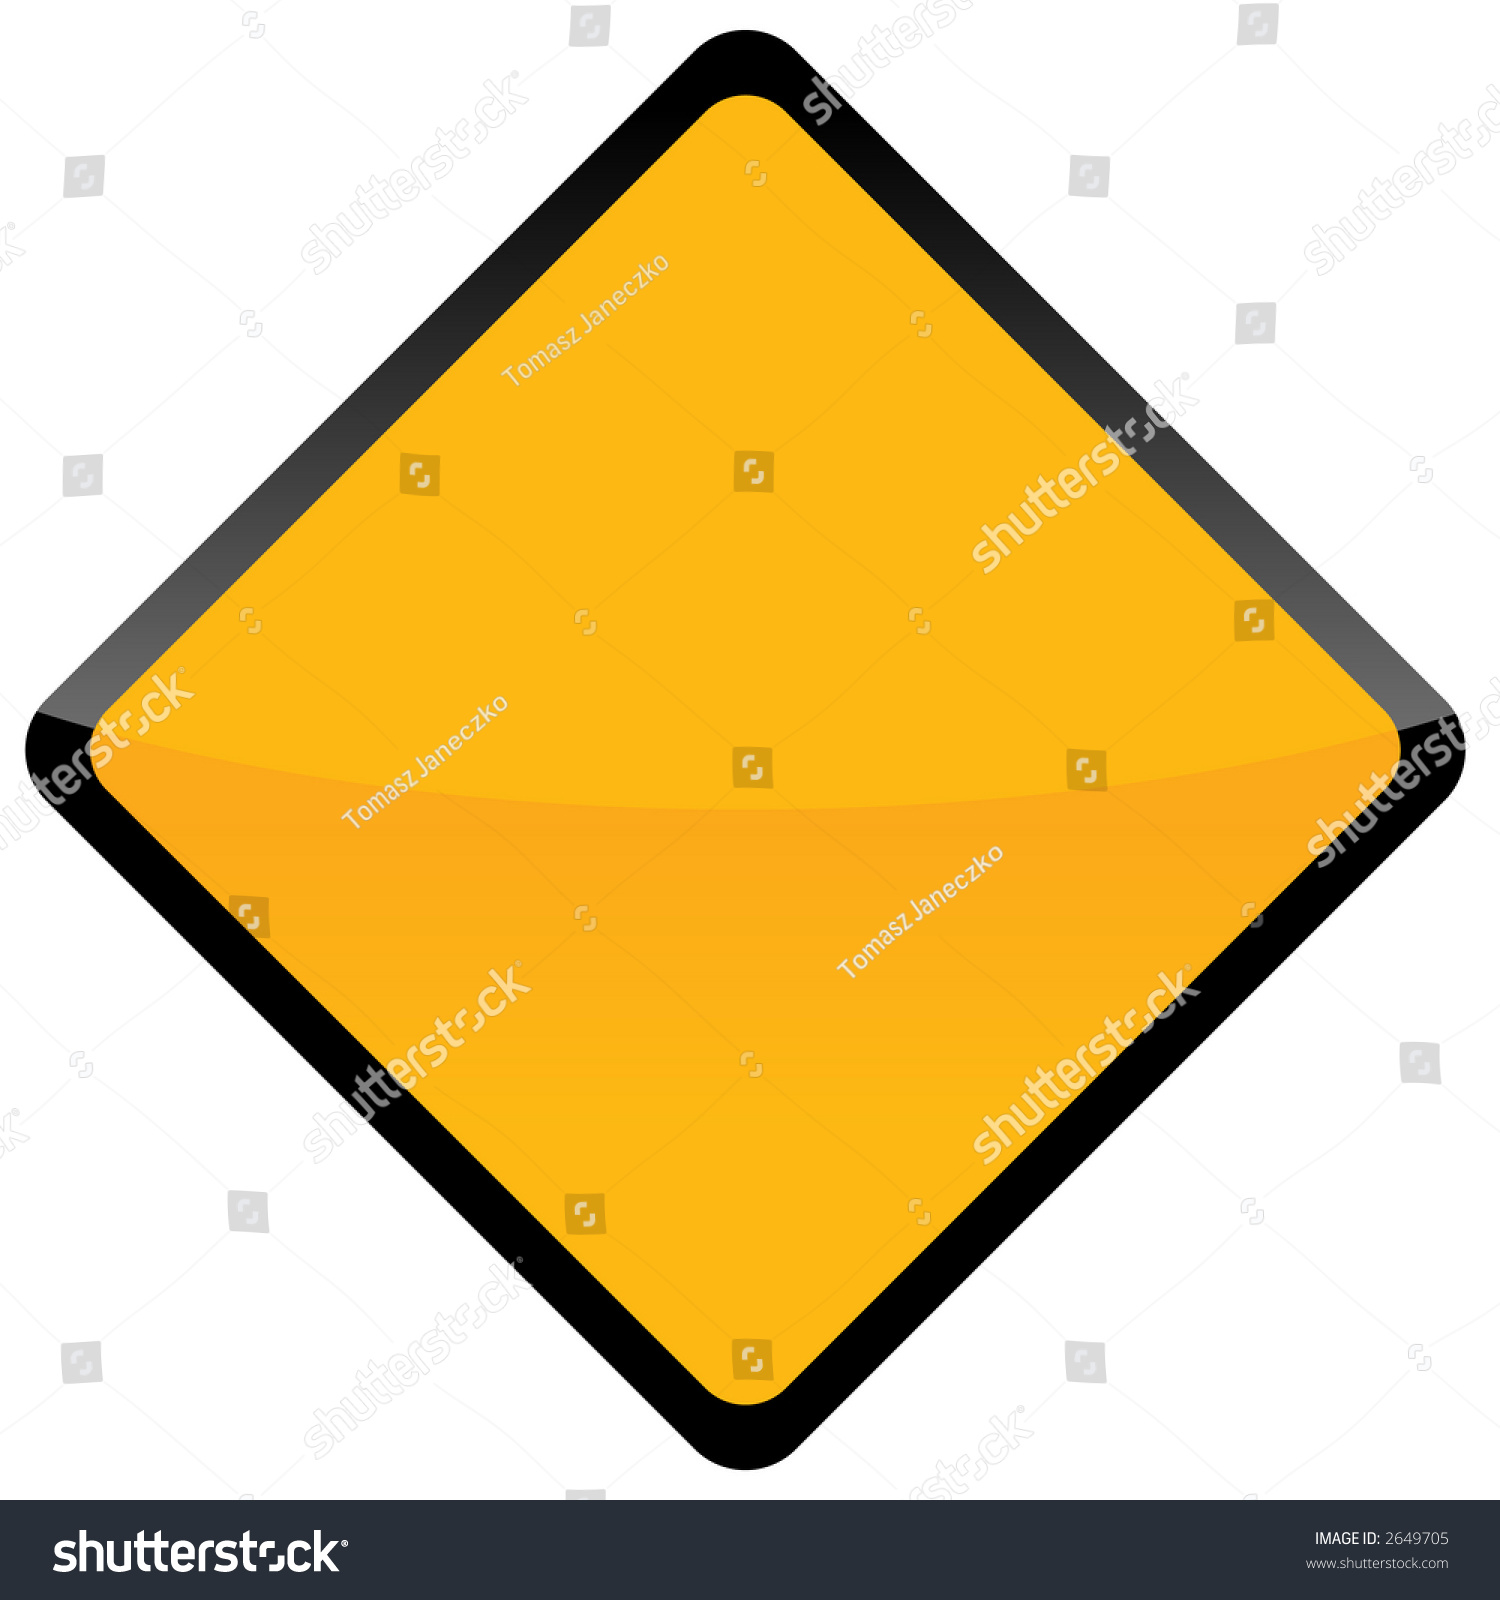 Road sign isolated background on white #2649705